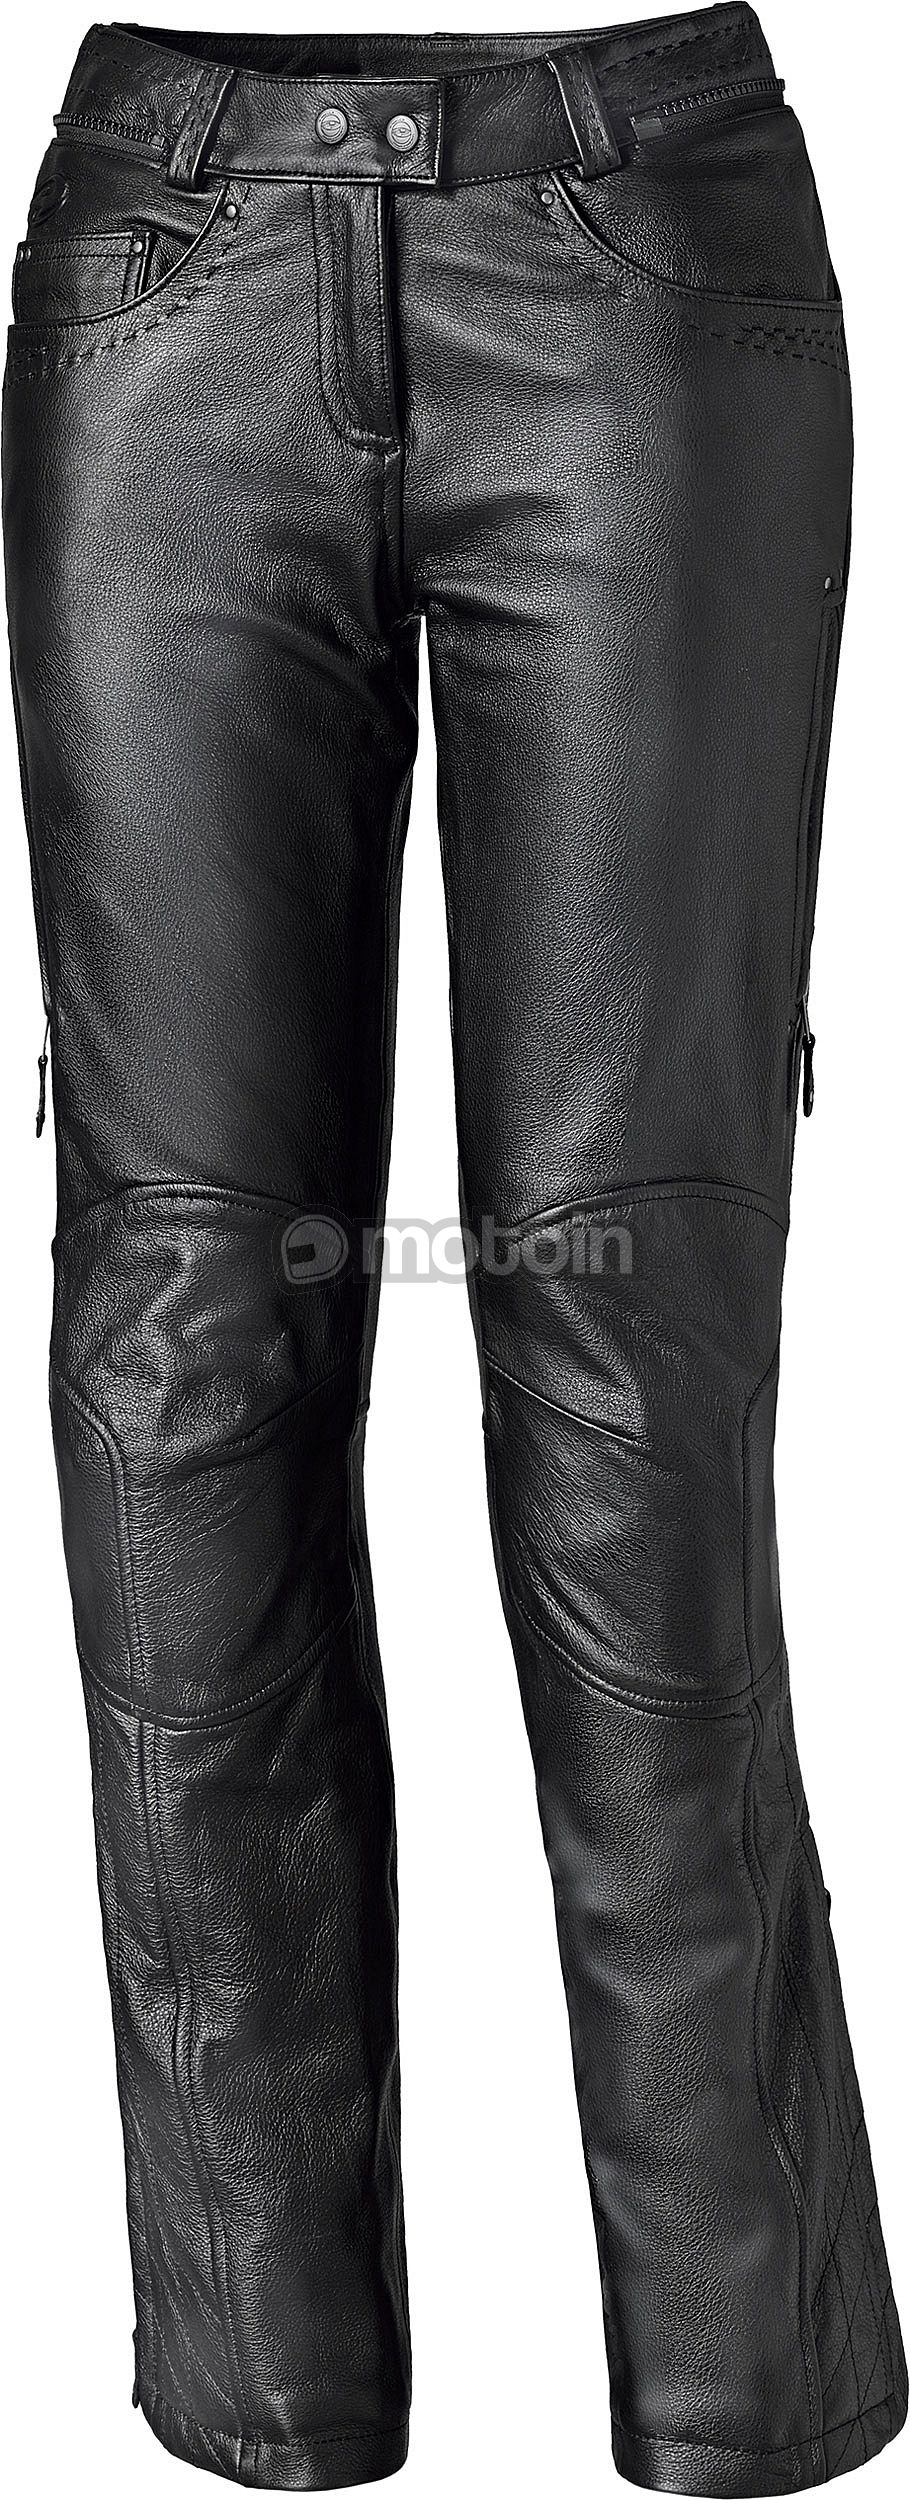 held leather pants